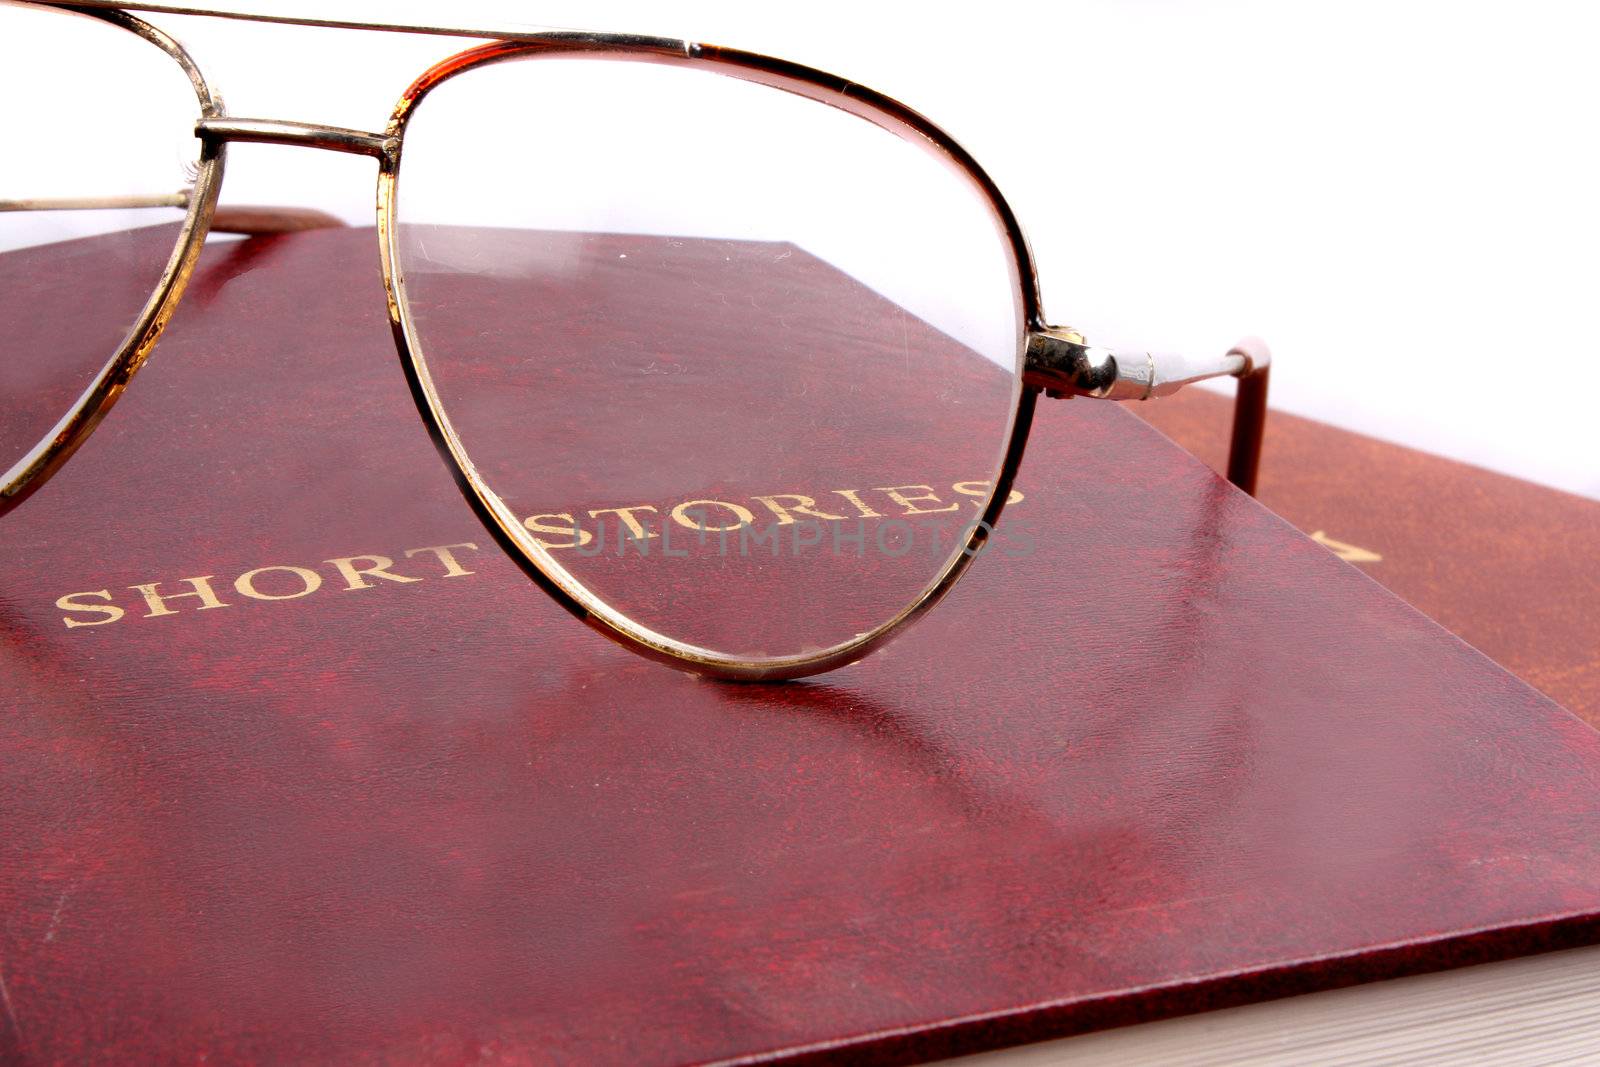 A leather cover book of short stories & reading glasses with metallic frame on them.